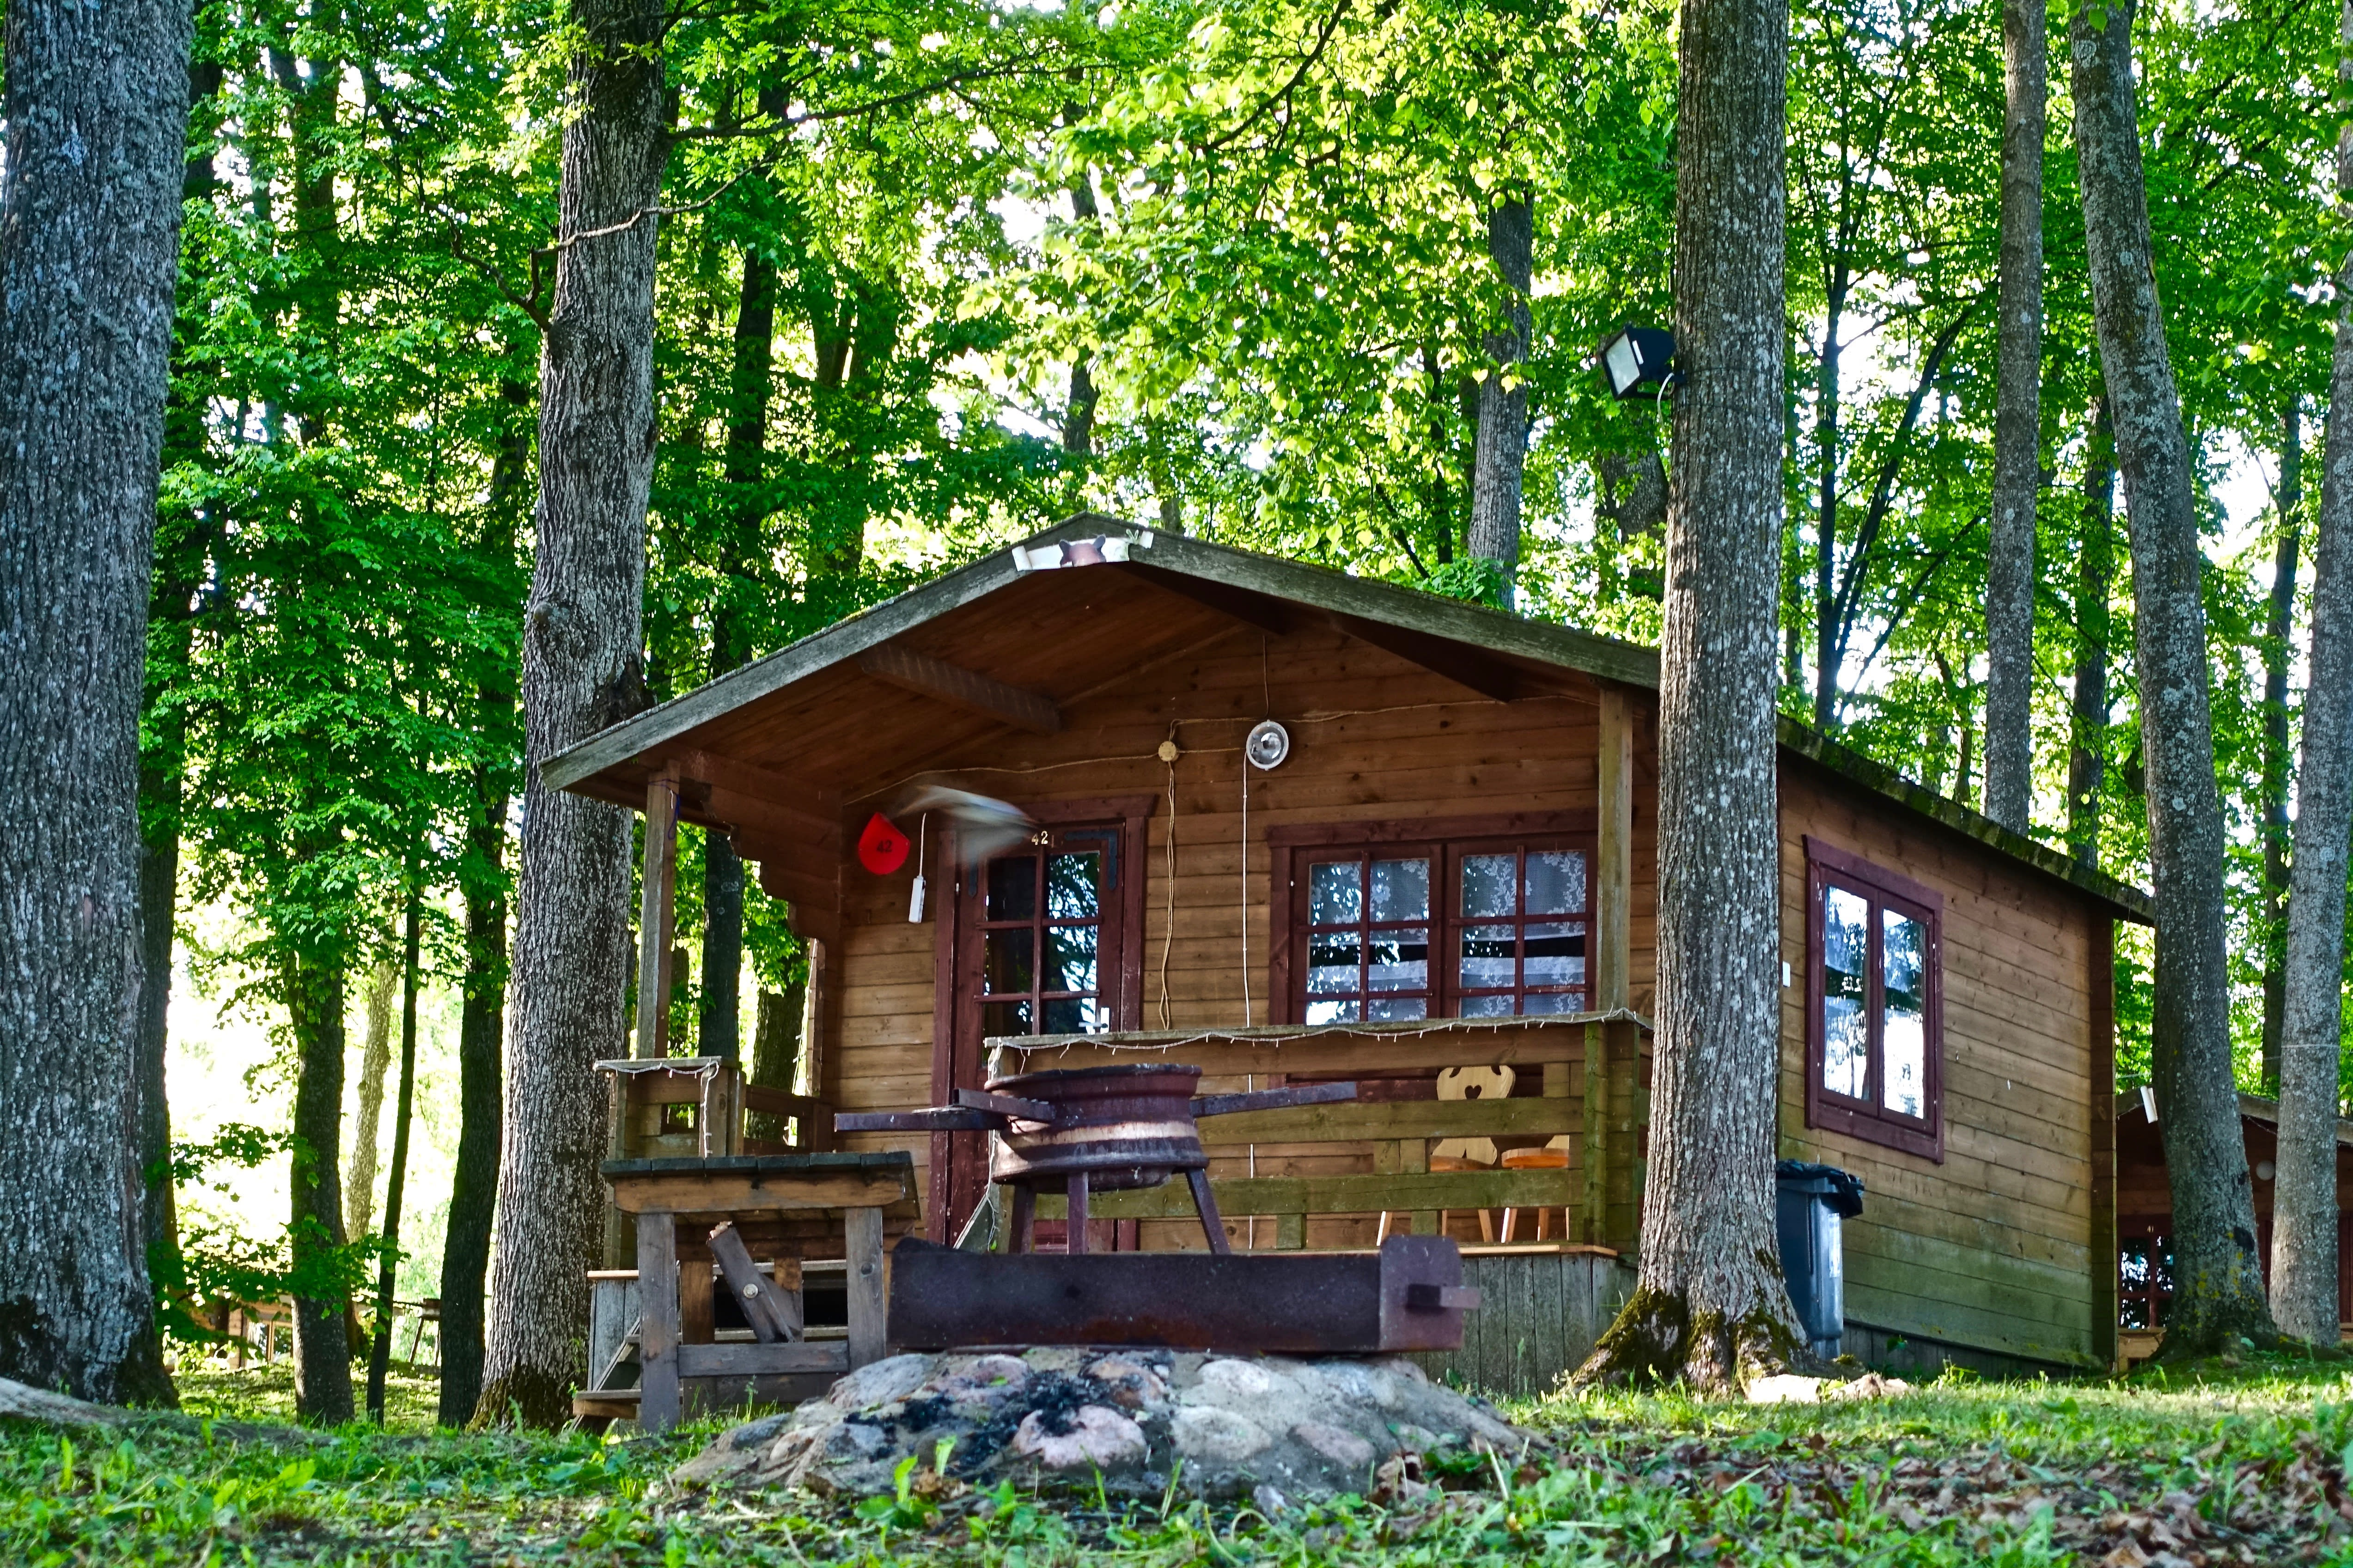 The BEST 10 Cottage locations for rent near me